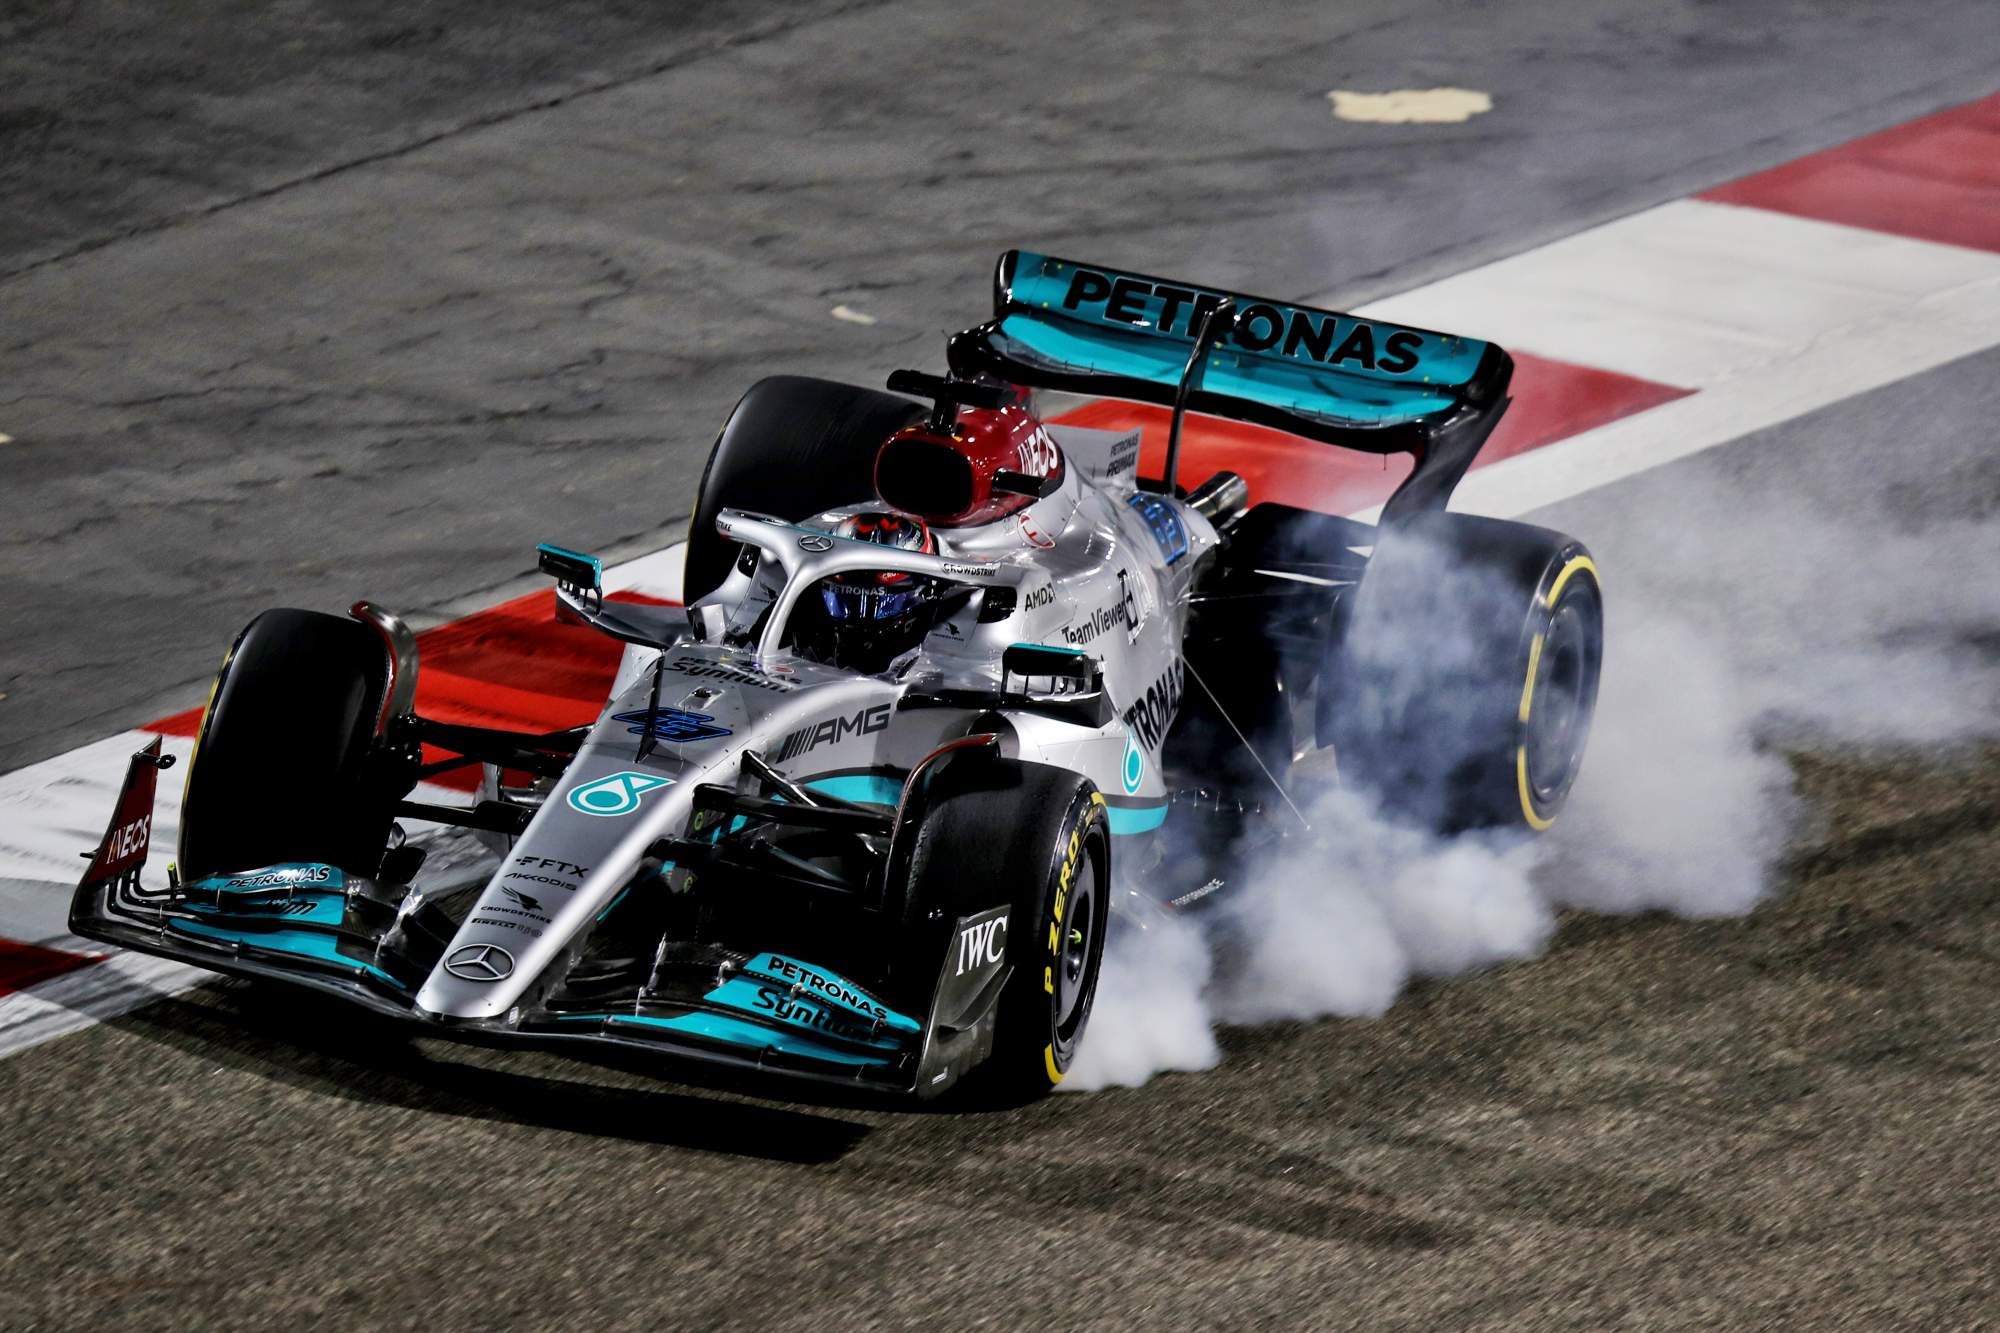 MercedesAMG PETRONAS F1 Team on Twitter And last but not least a few  extra mobile backgrounds Have any of our SaudiArabianGP snaps made it as  your new wallpaper  httpstcoEDw9wmx0kQ  Twitter